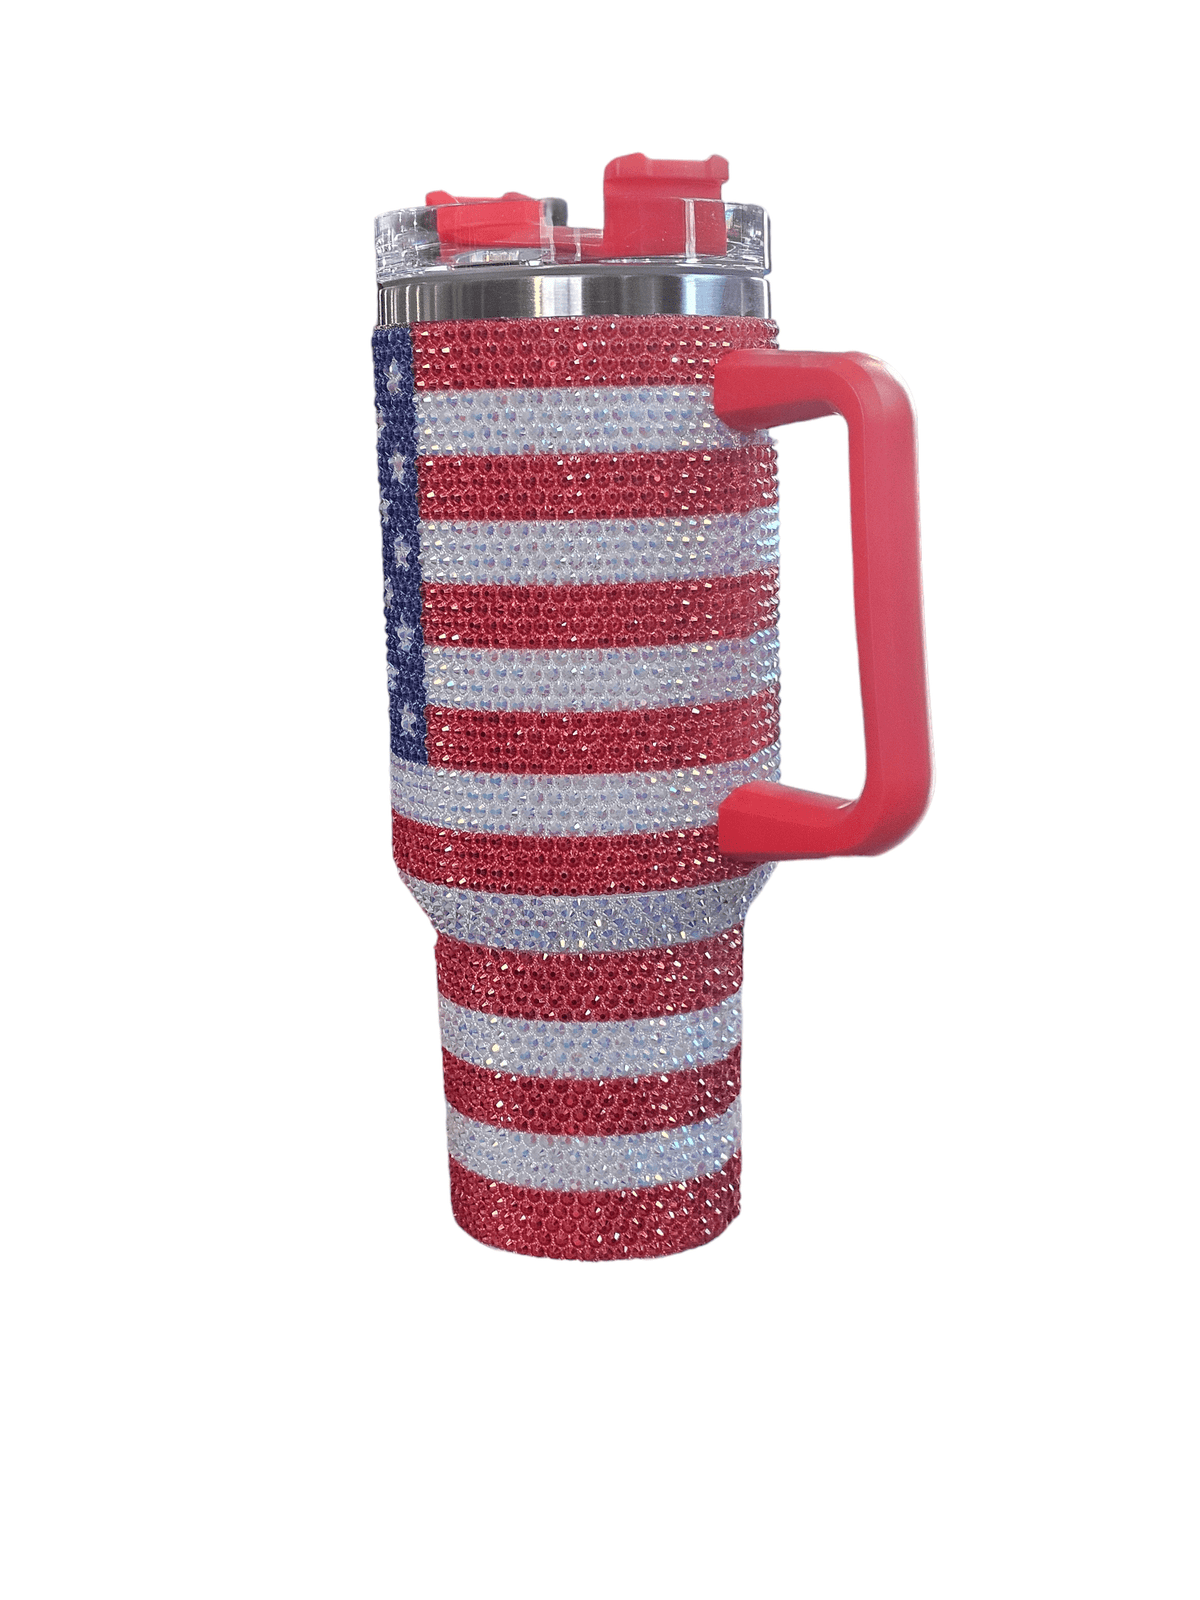 Patriotic USA Flag 40oz Stainless Steel Tumbler - Luxury Rhinestone Encrusted, Double-Walled Insulated Drinkware